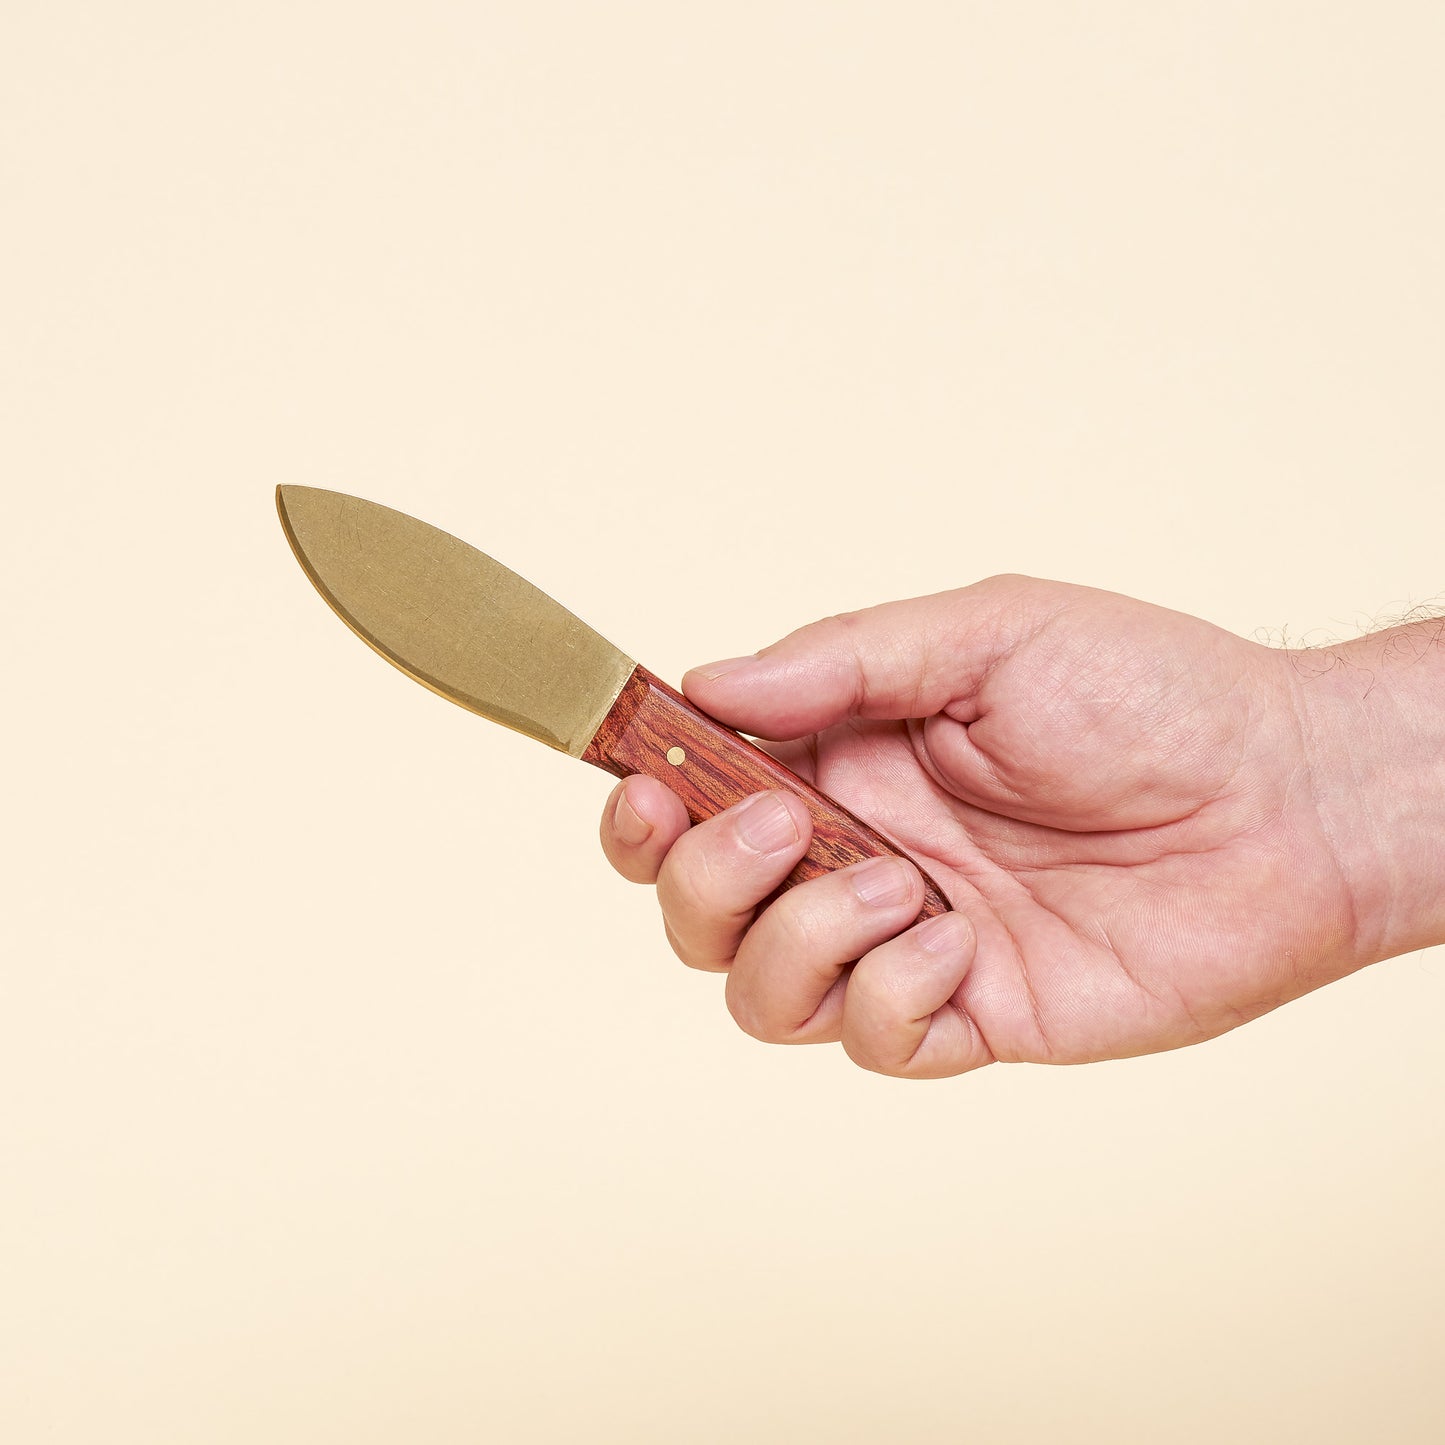 Cheese knife with brass blade and wooden handle.